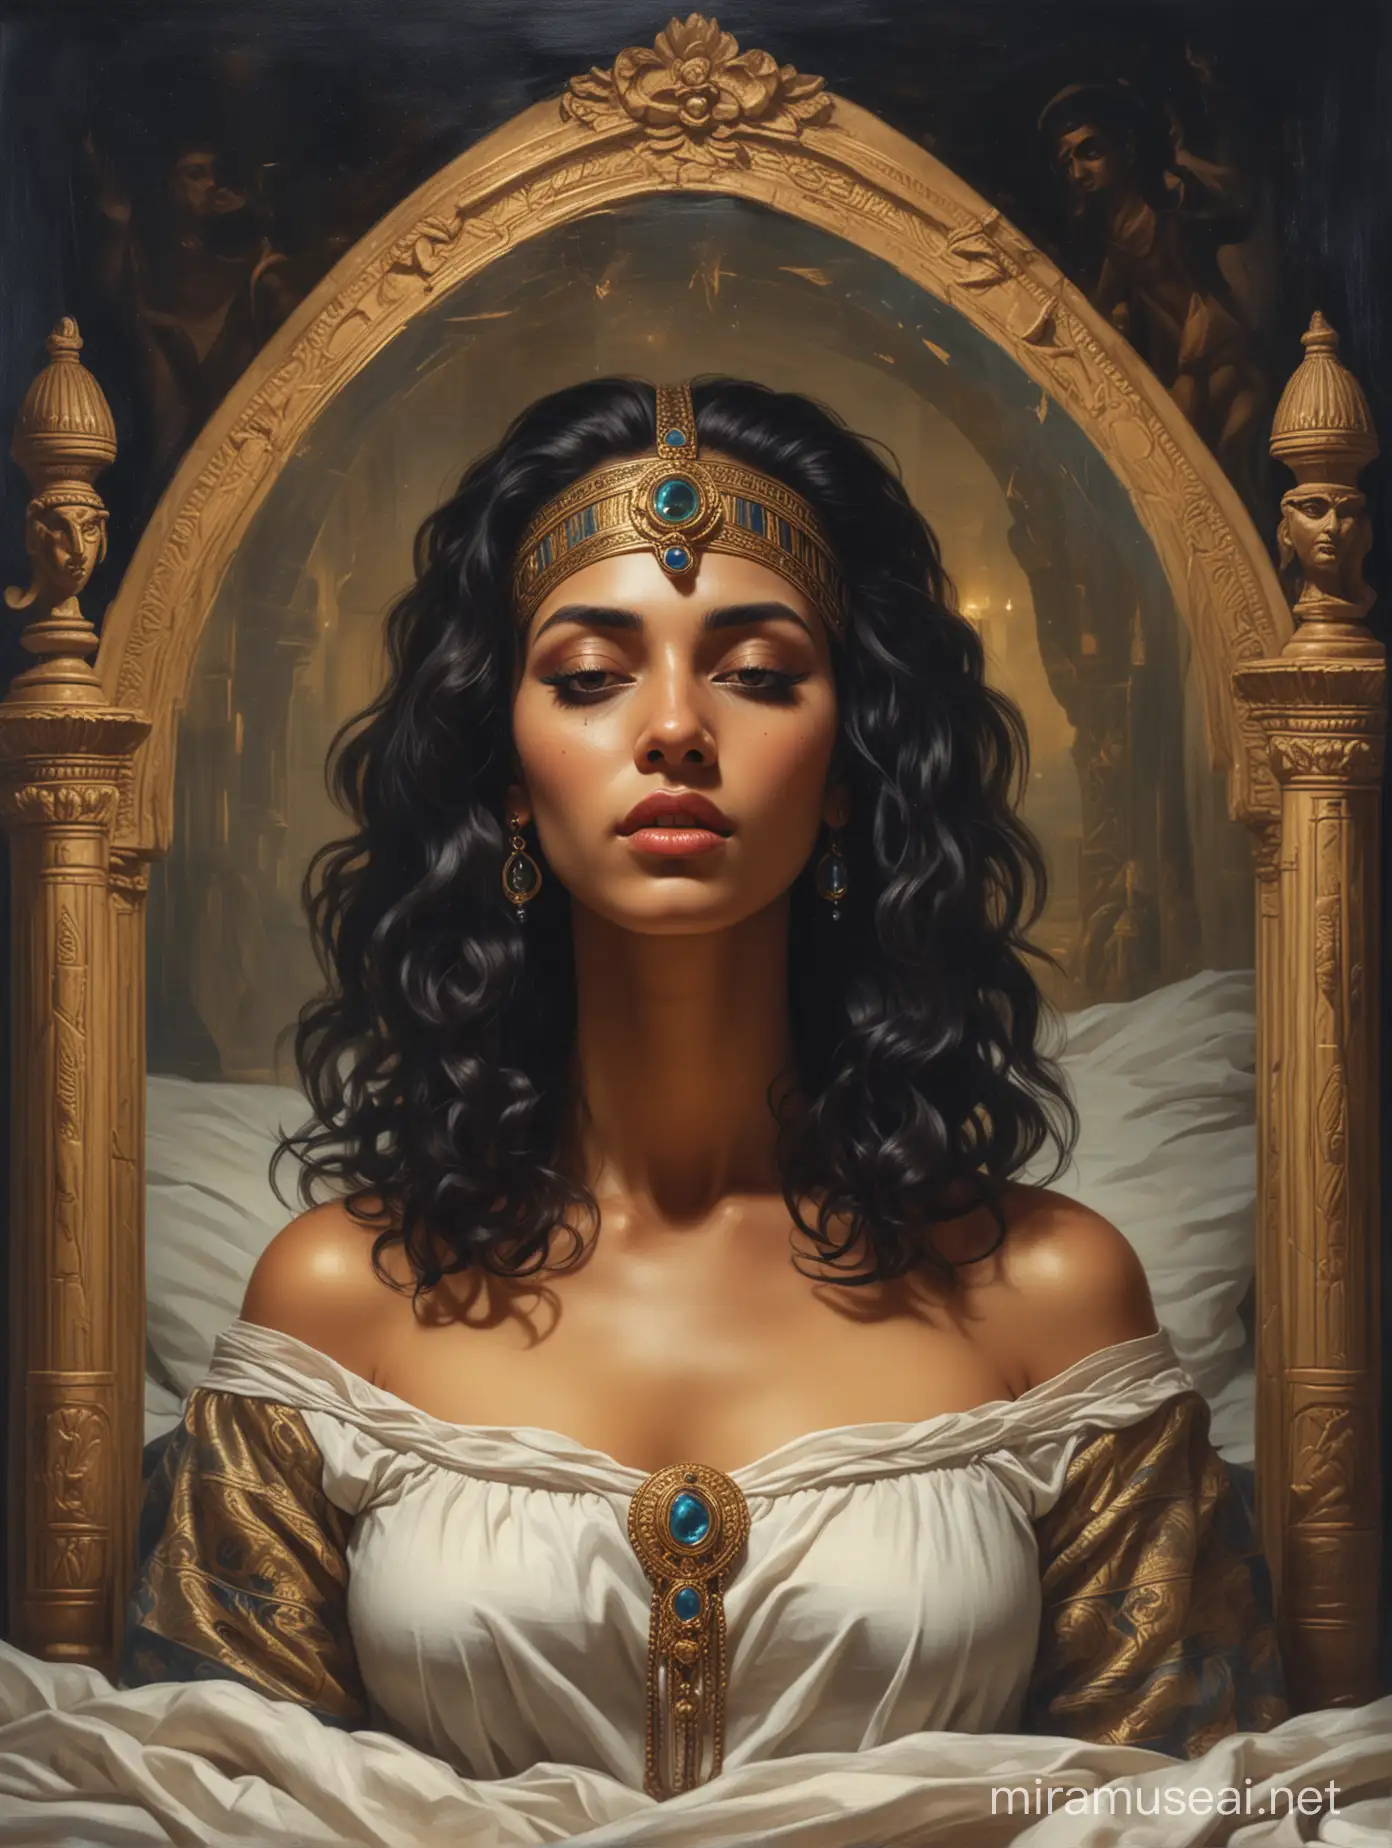 Double exposure The worries that keep you awake at night, until you give in and welcome your sleep paralysis demon, with Beautiful Egyptian woman, oil painting, Baroque style